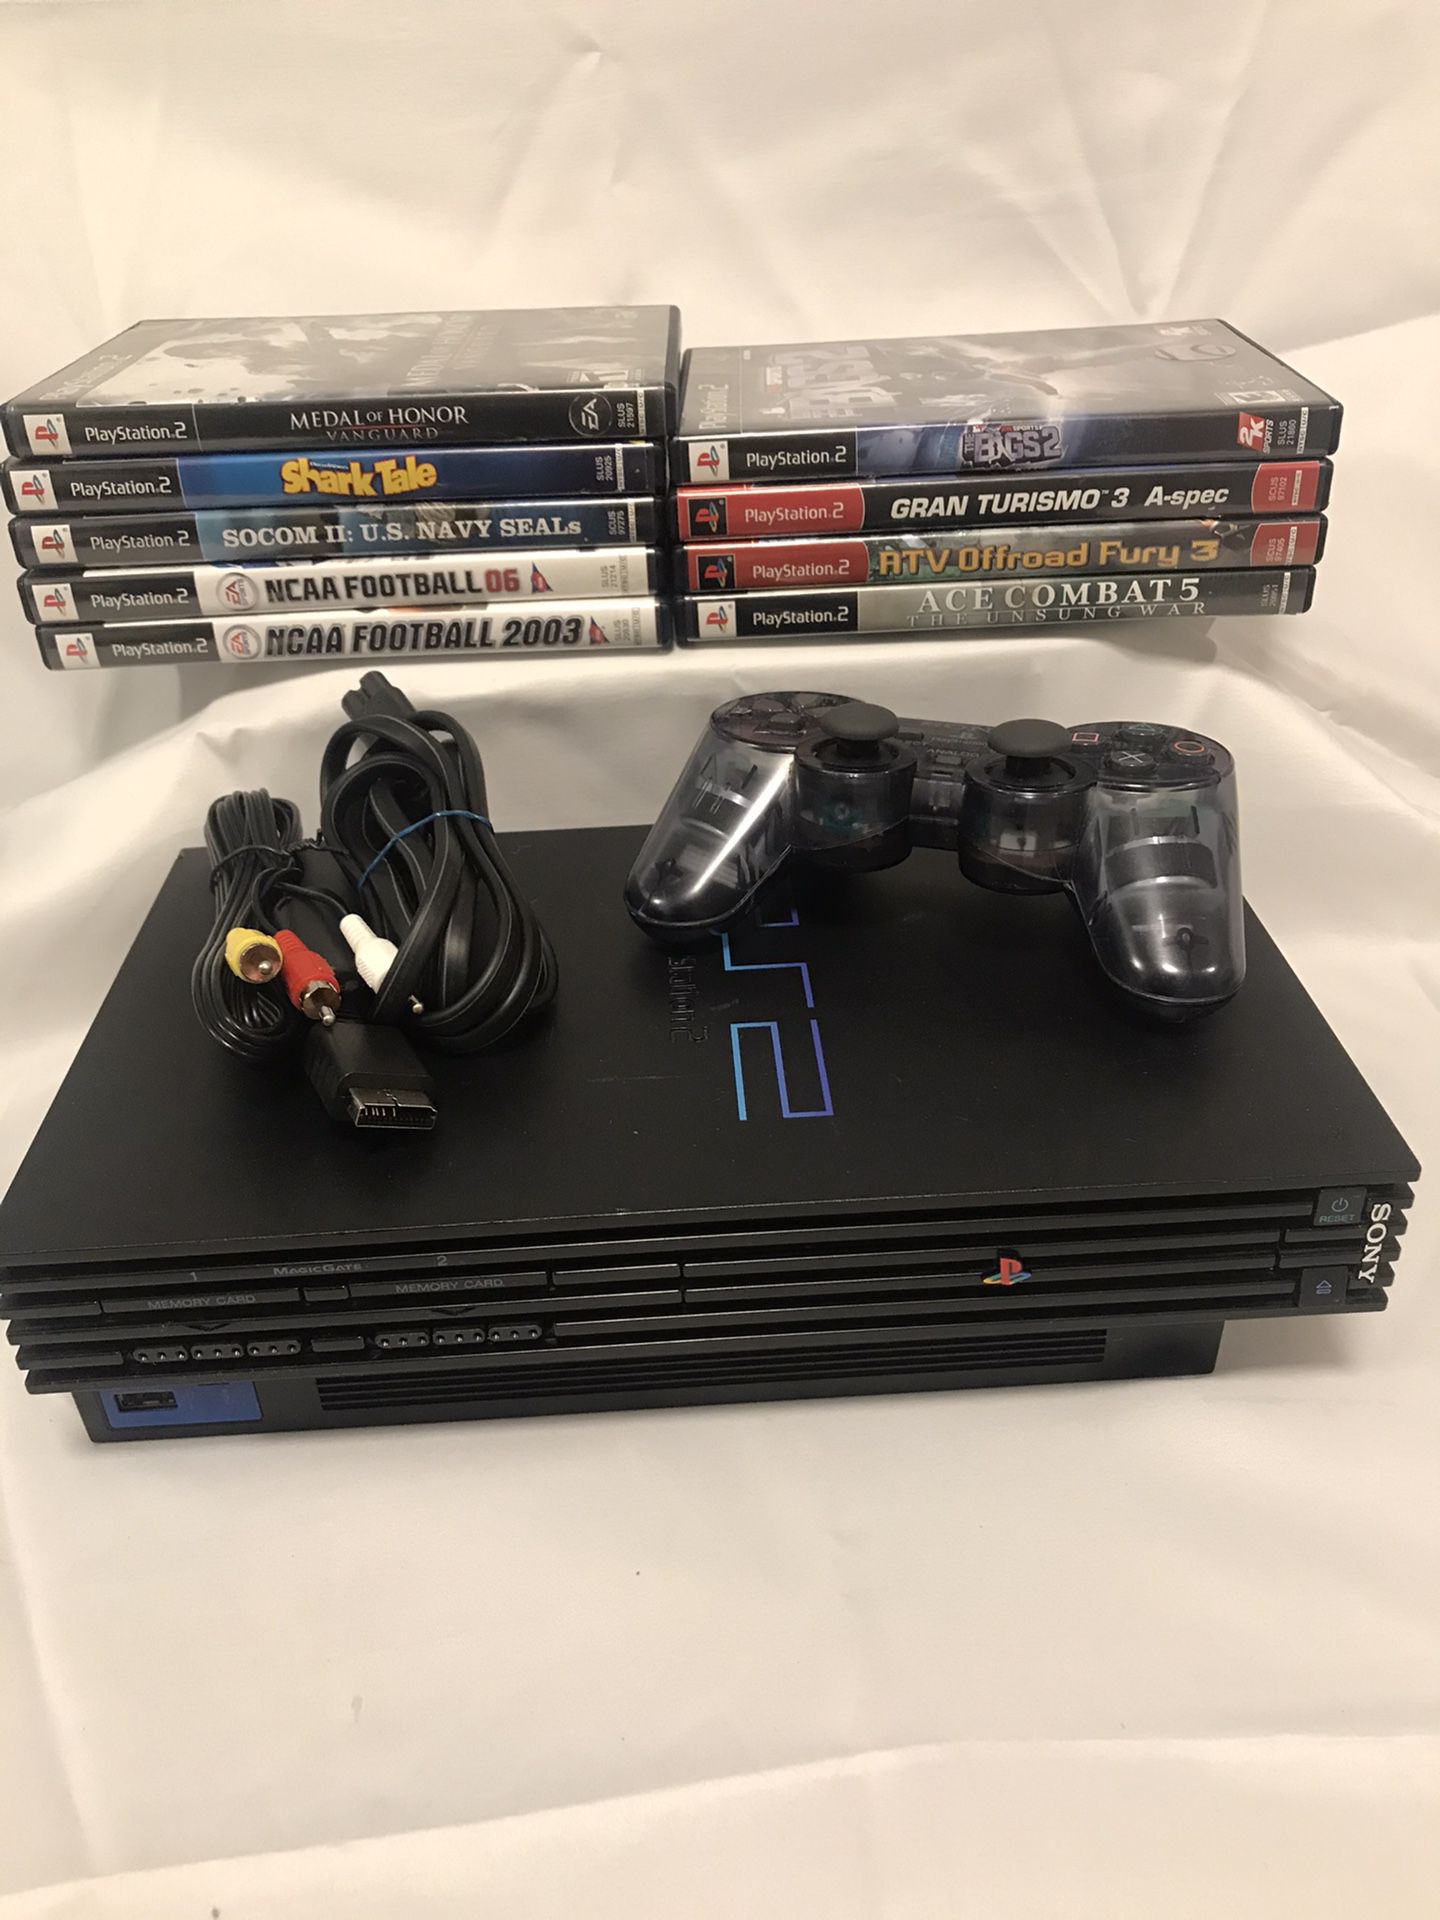 PlayStation 2 Console with 9 games and a remote